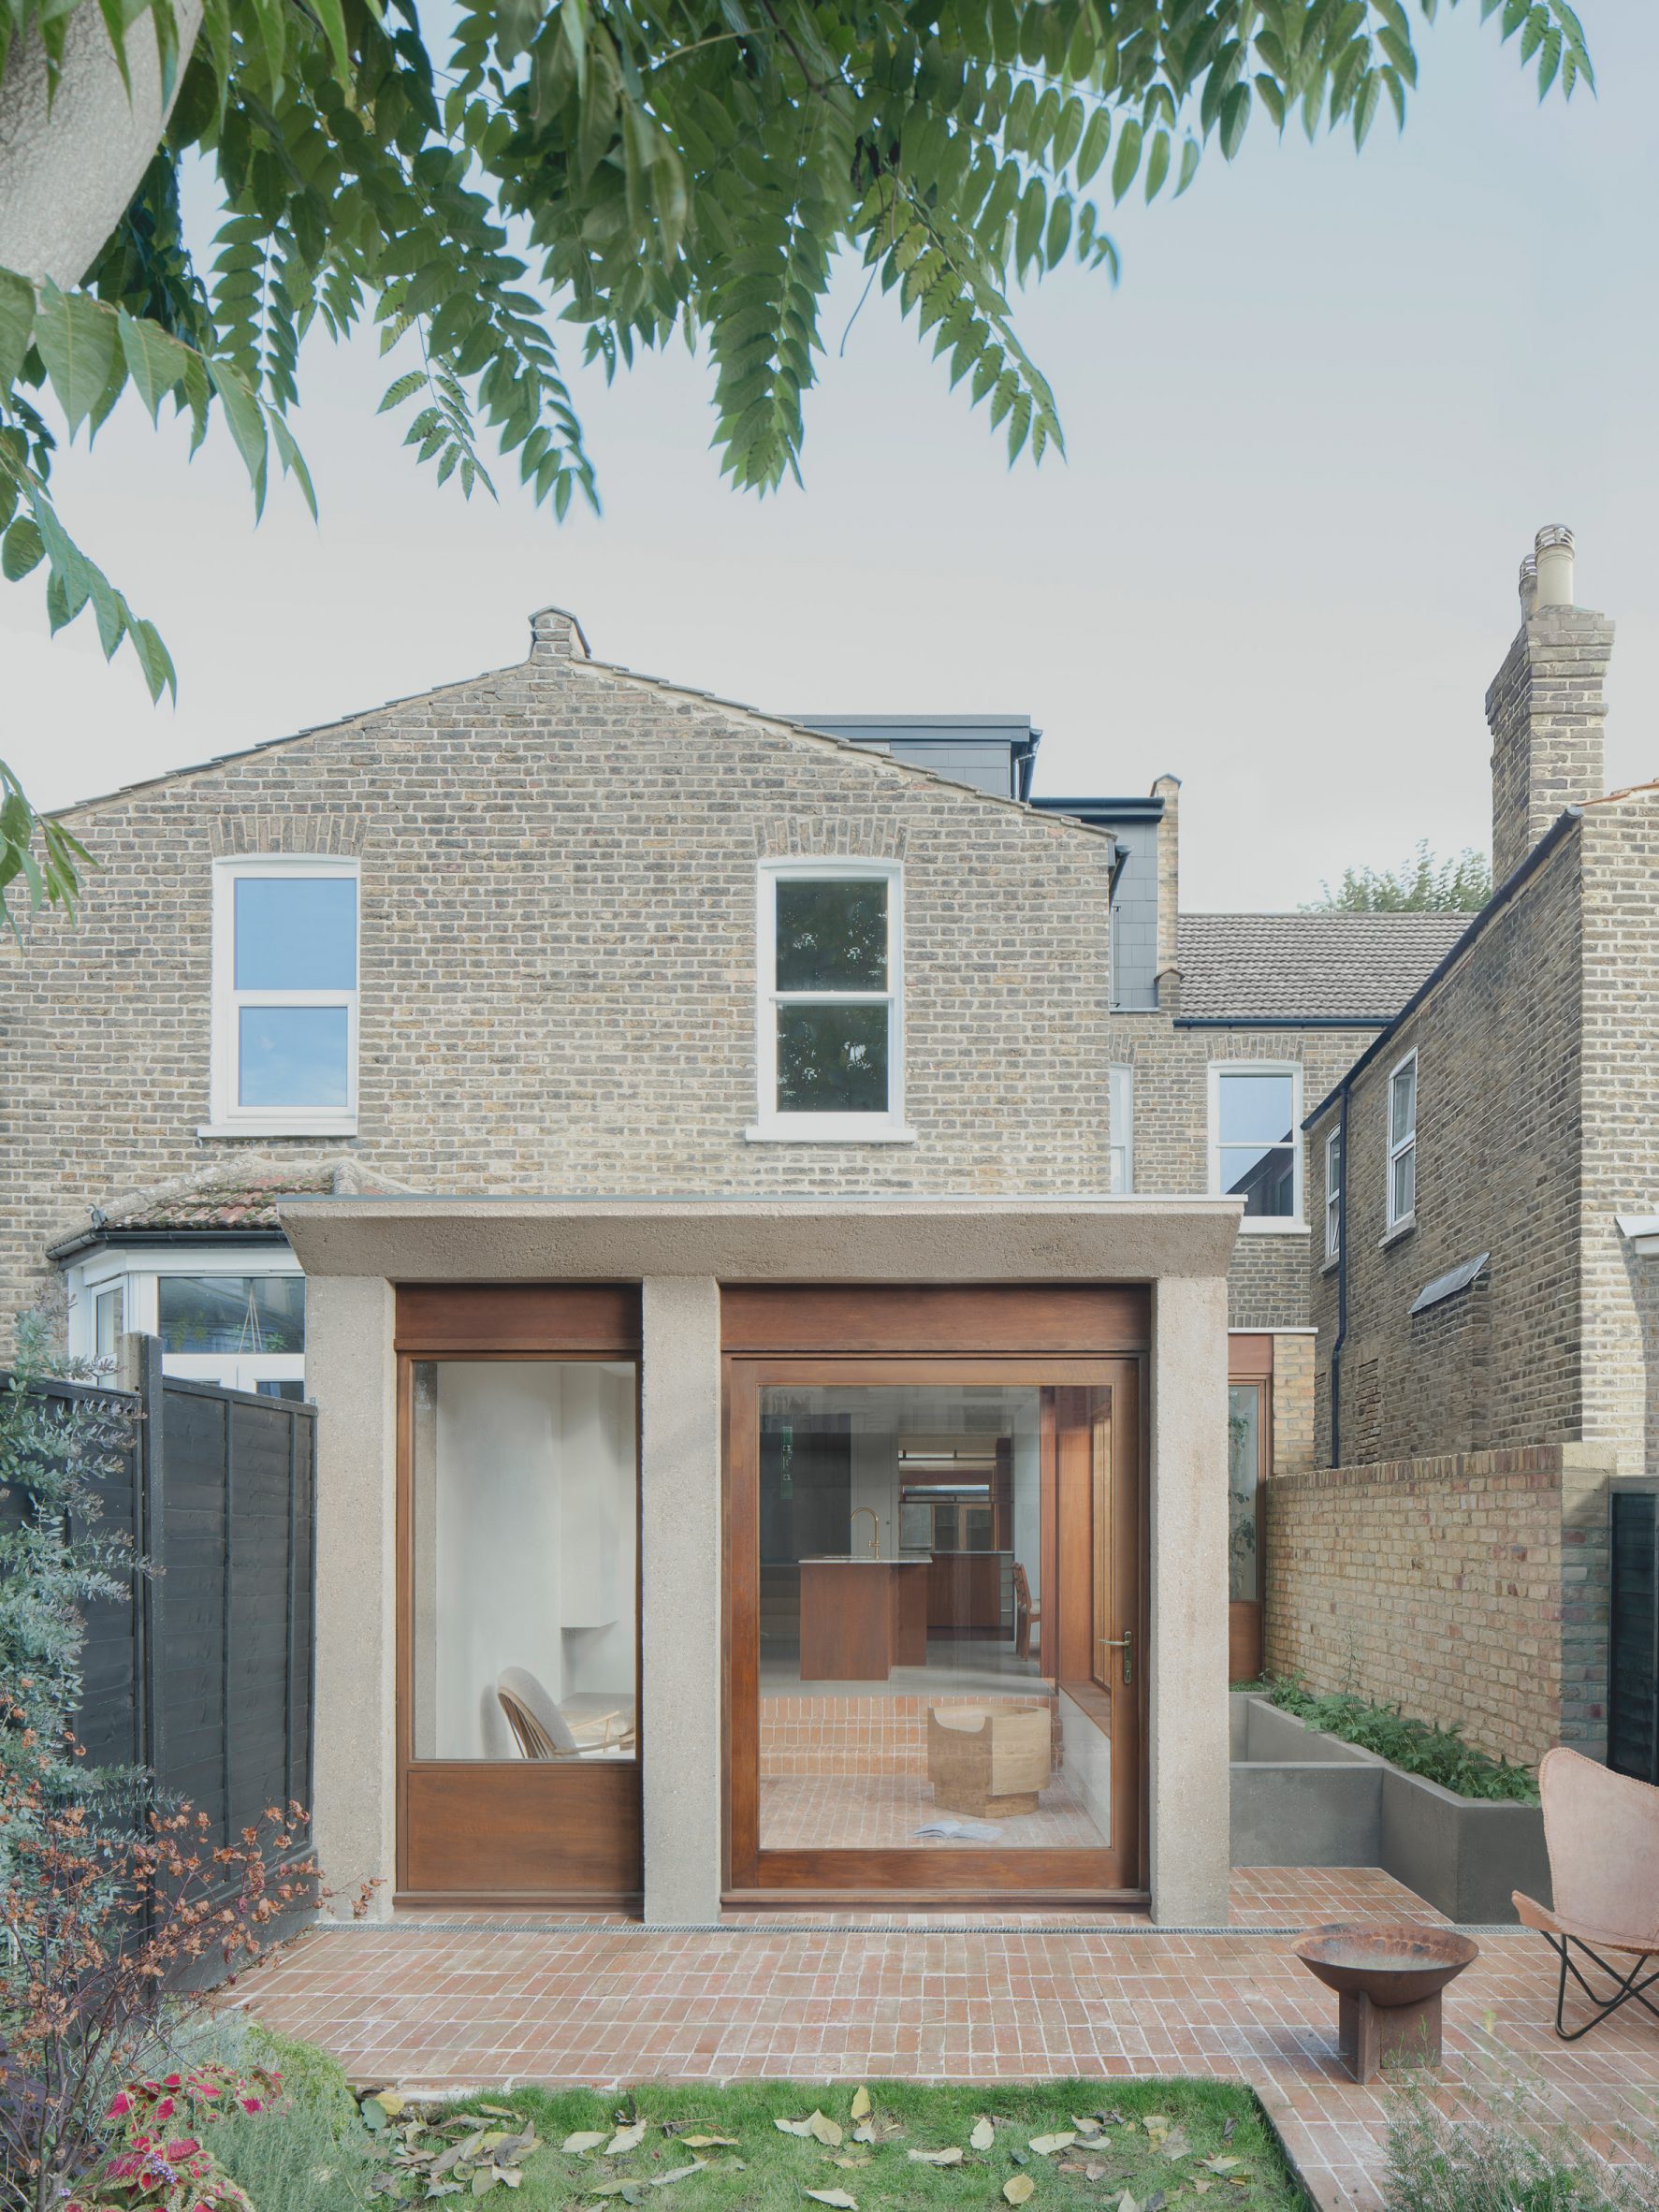 Exterior of Cast House extension by EBBA